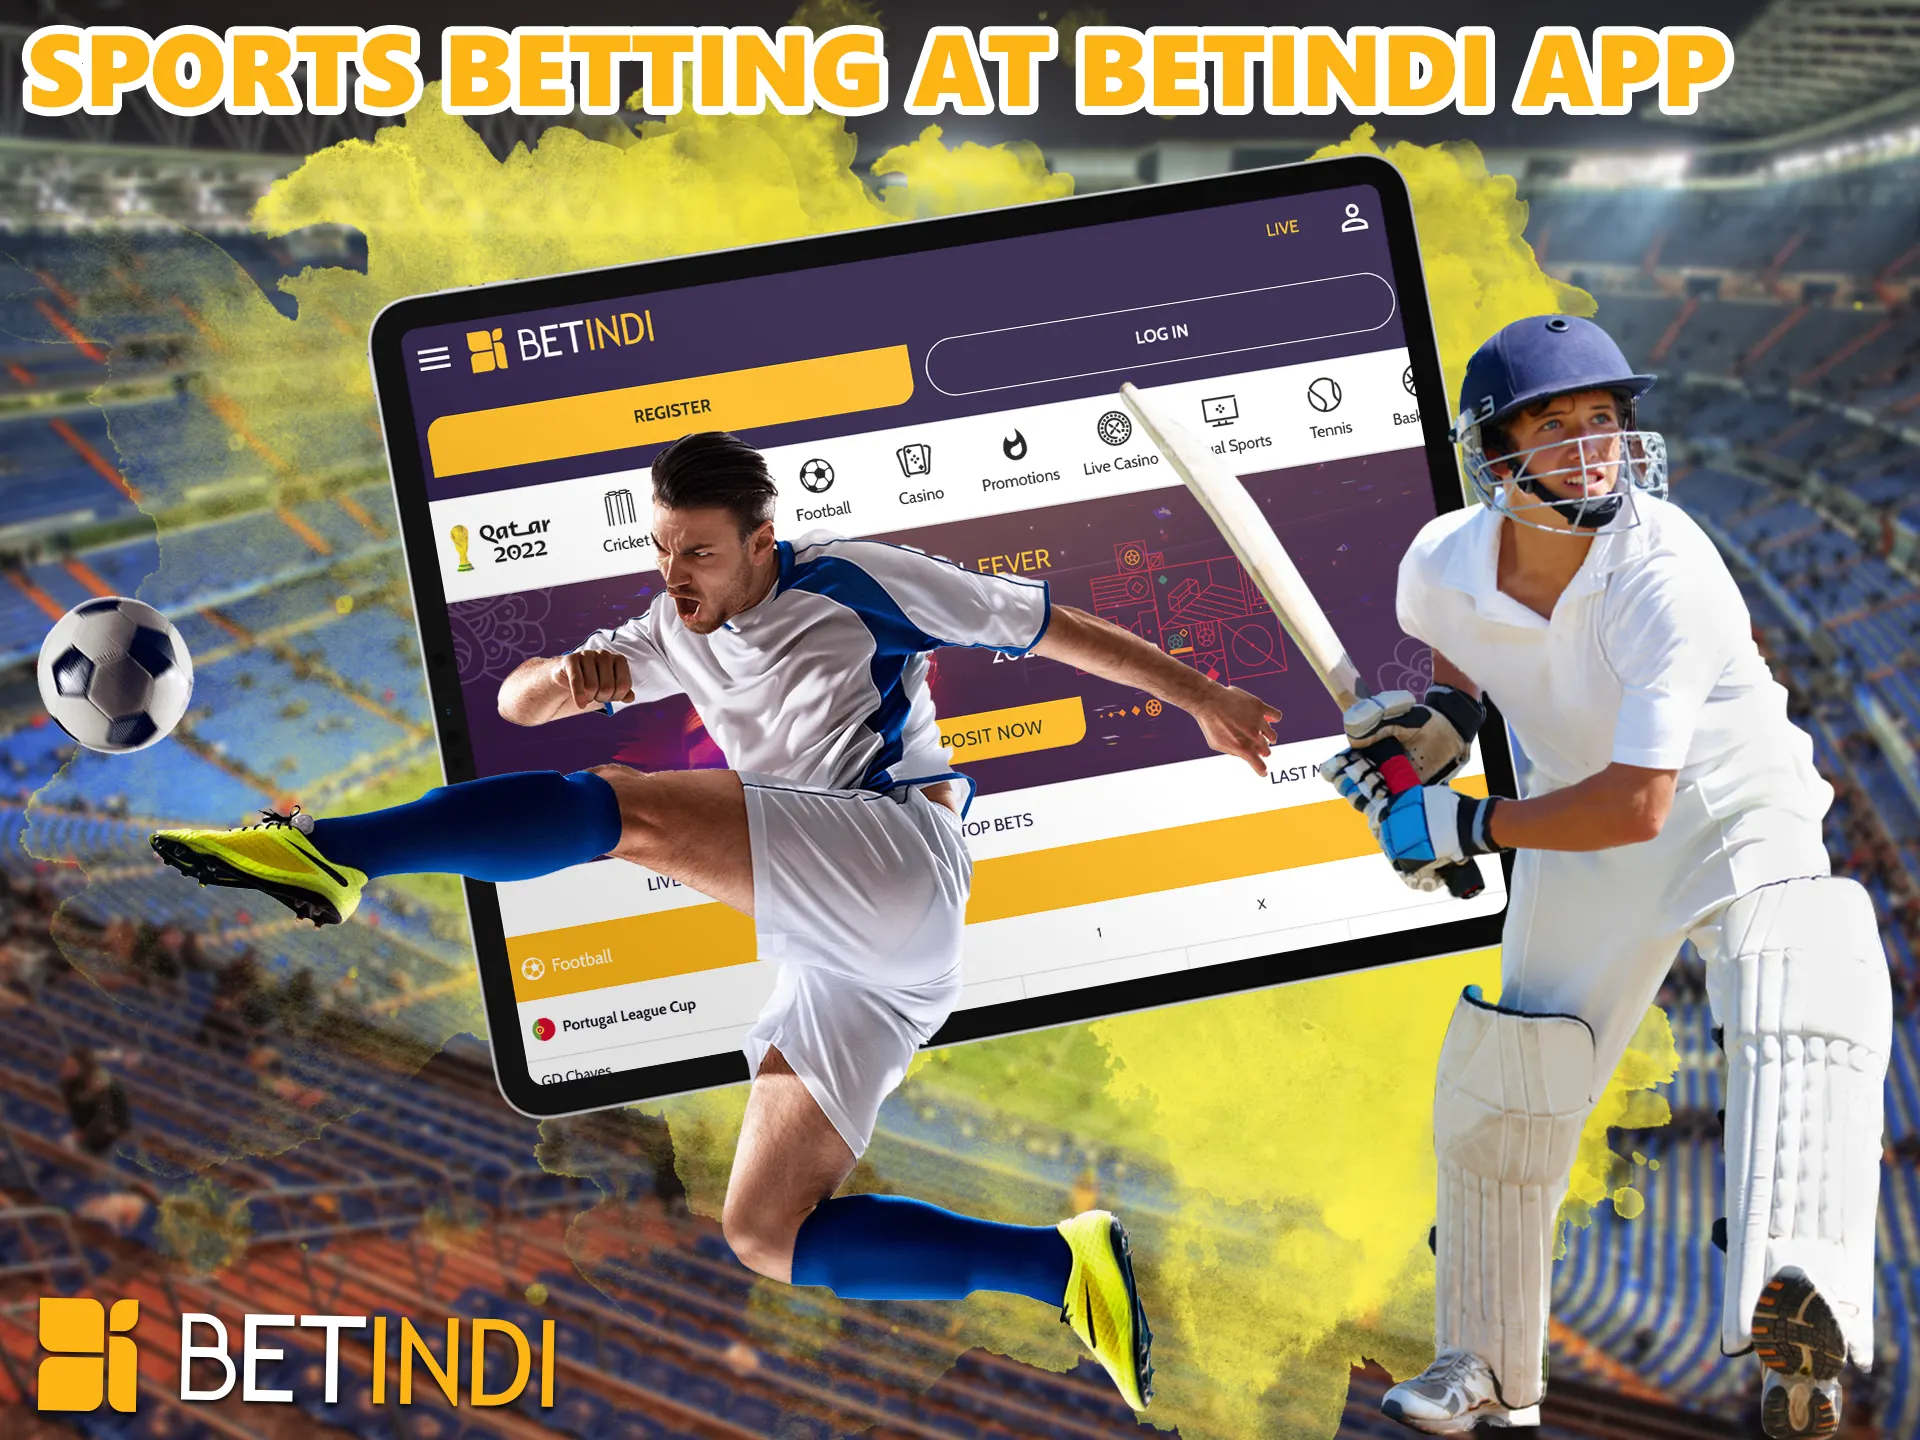 There are 25 different sports in the BetIndi betting app, everyone will find something interesting.